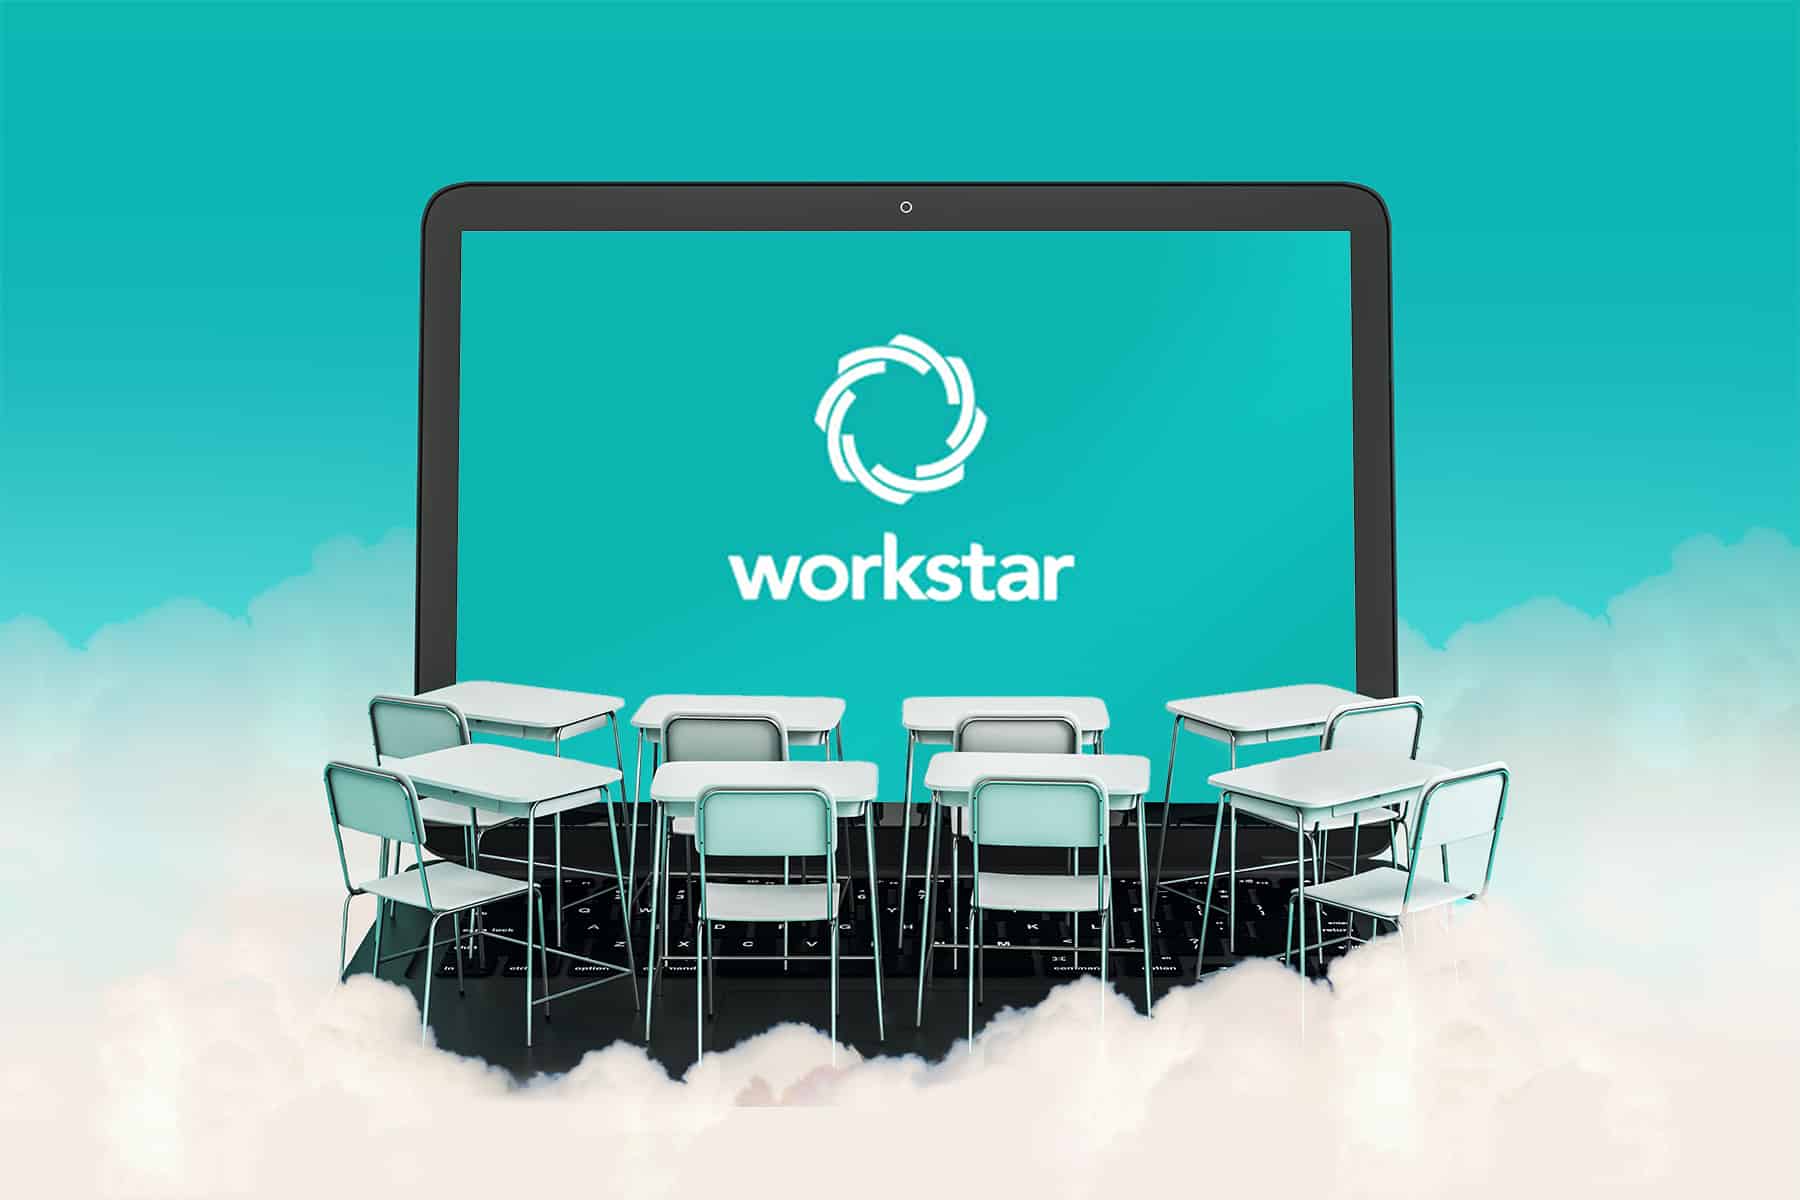 Workstar logo on a large laptop screen with teal background with eight desks and chairs on clouds